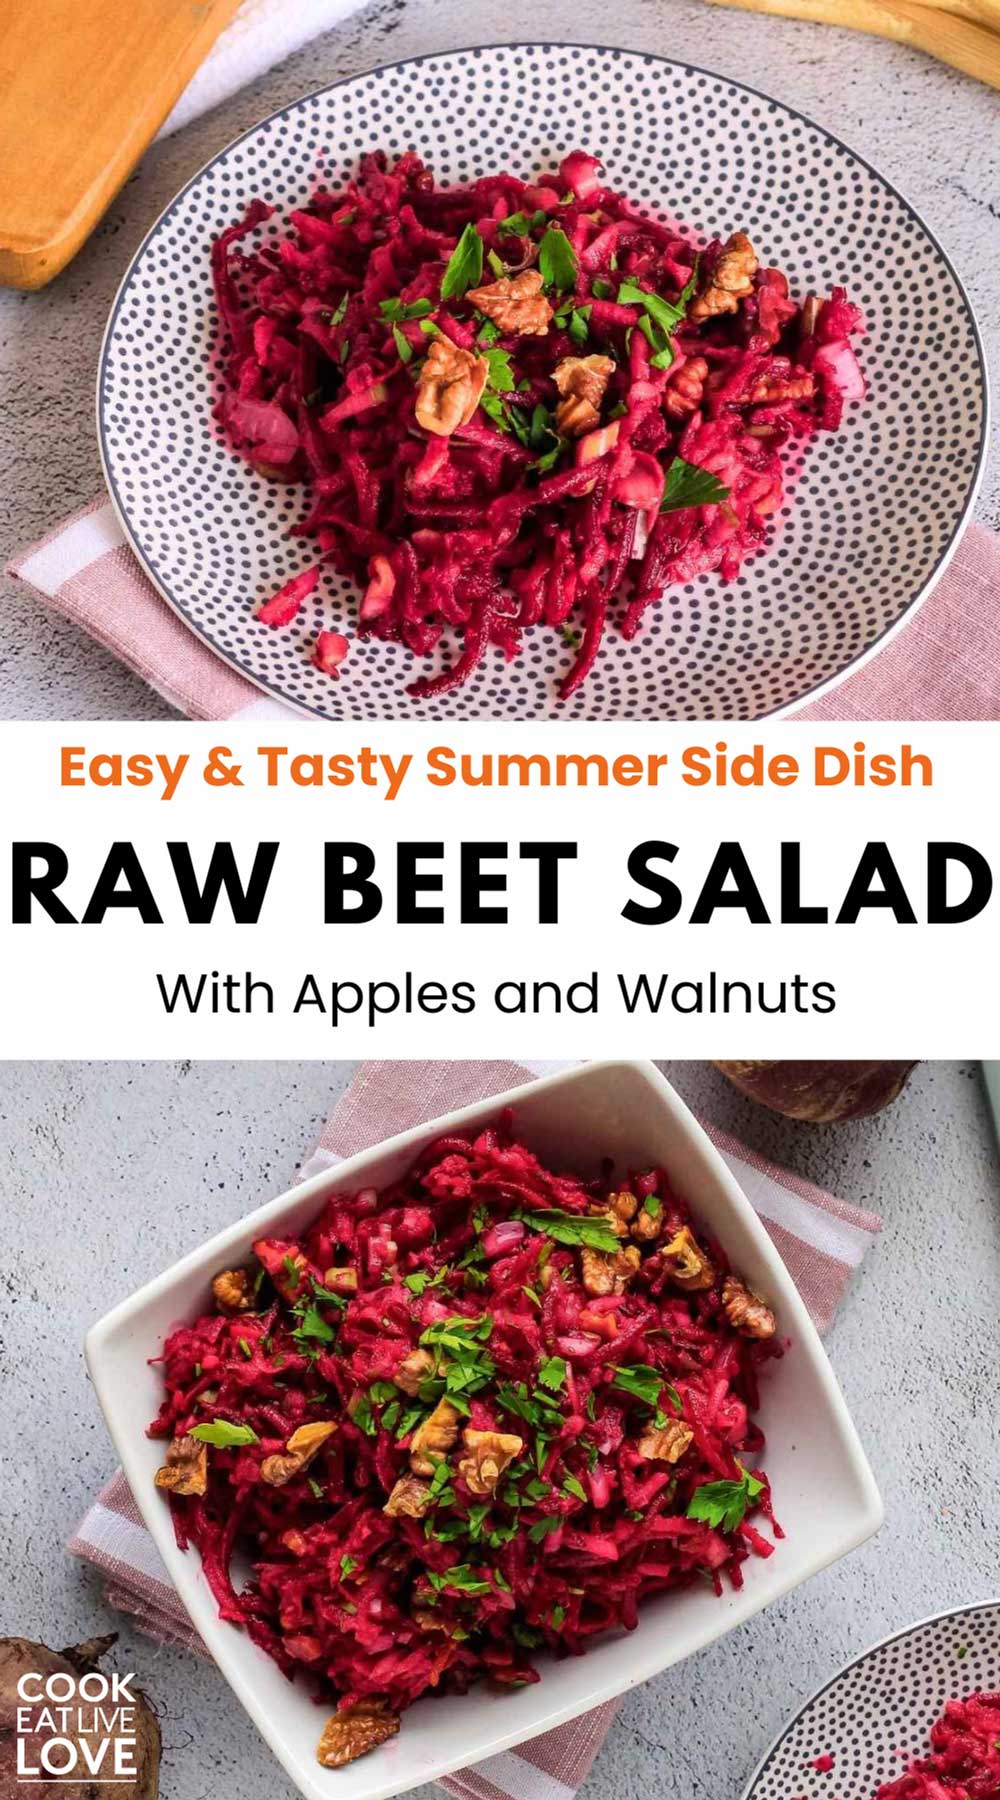 Pin for pinterest with overhead view of plate of beetroot apple salad ready to eat.